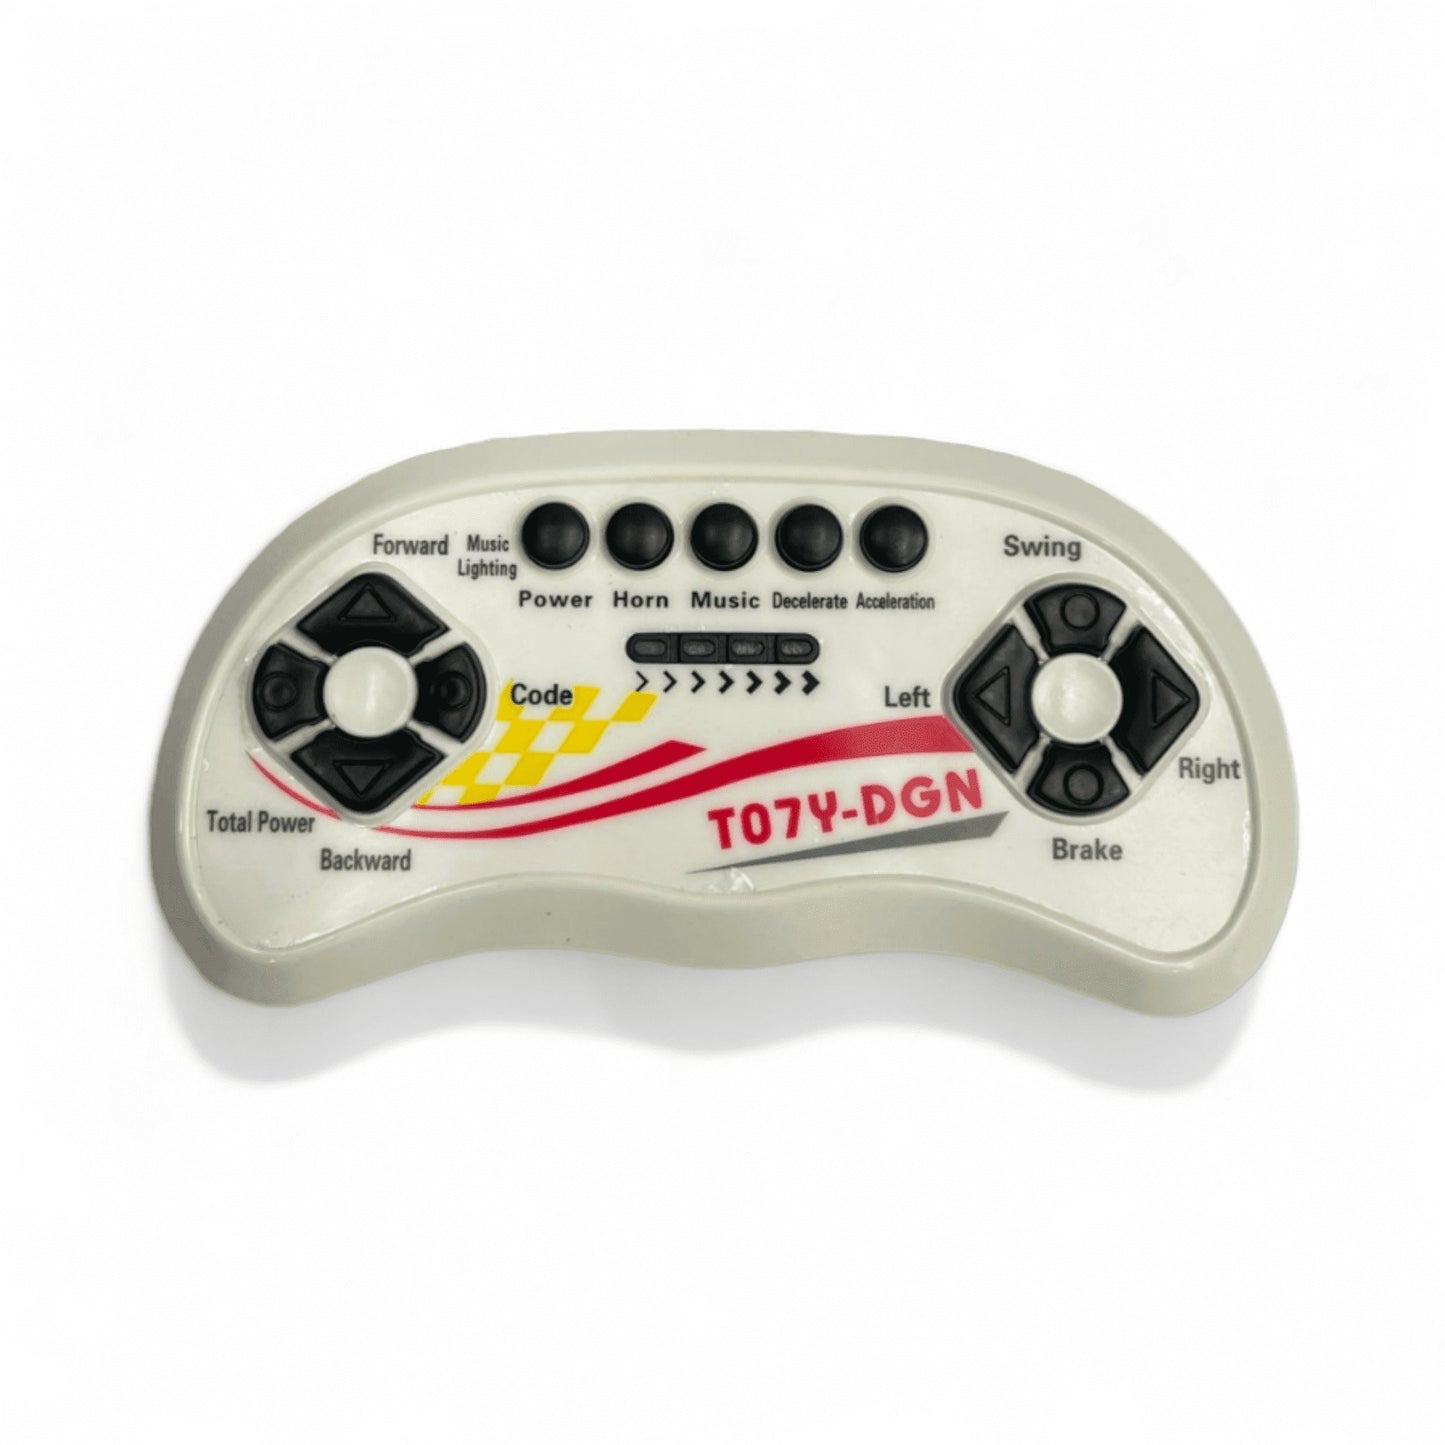 PATOYS | T07Y - DGN remote controller for children’s electric vehicle - PATOYS